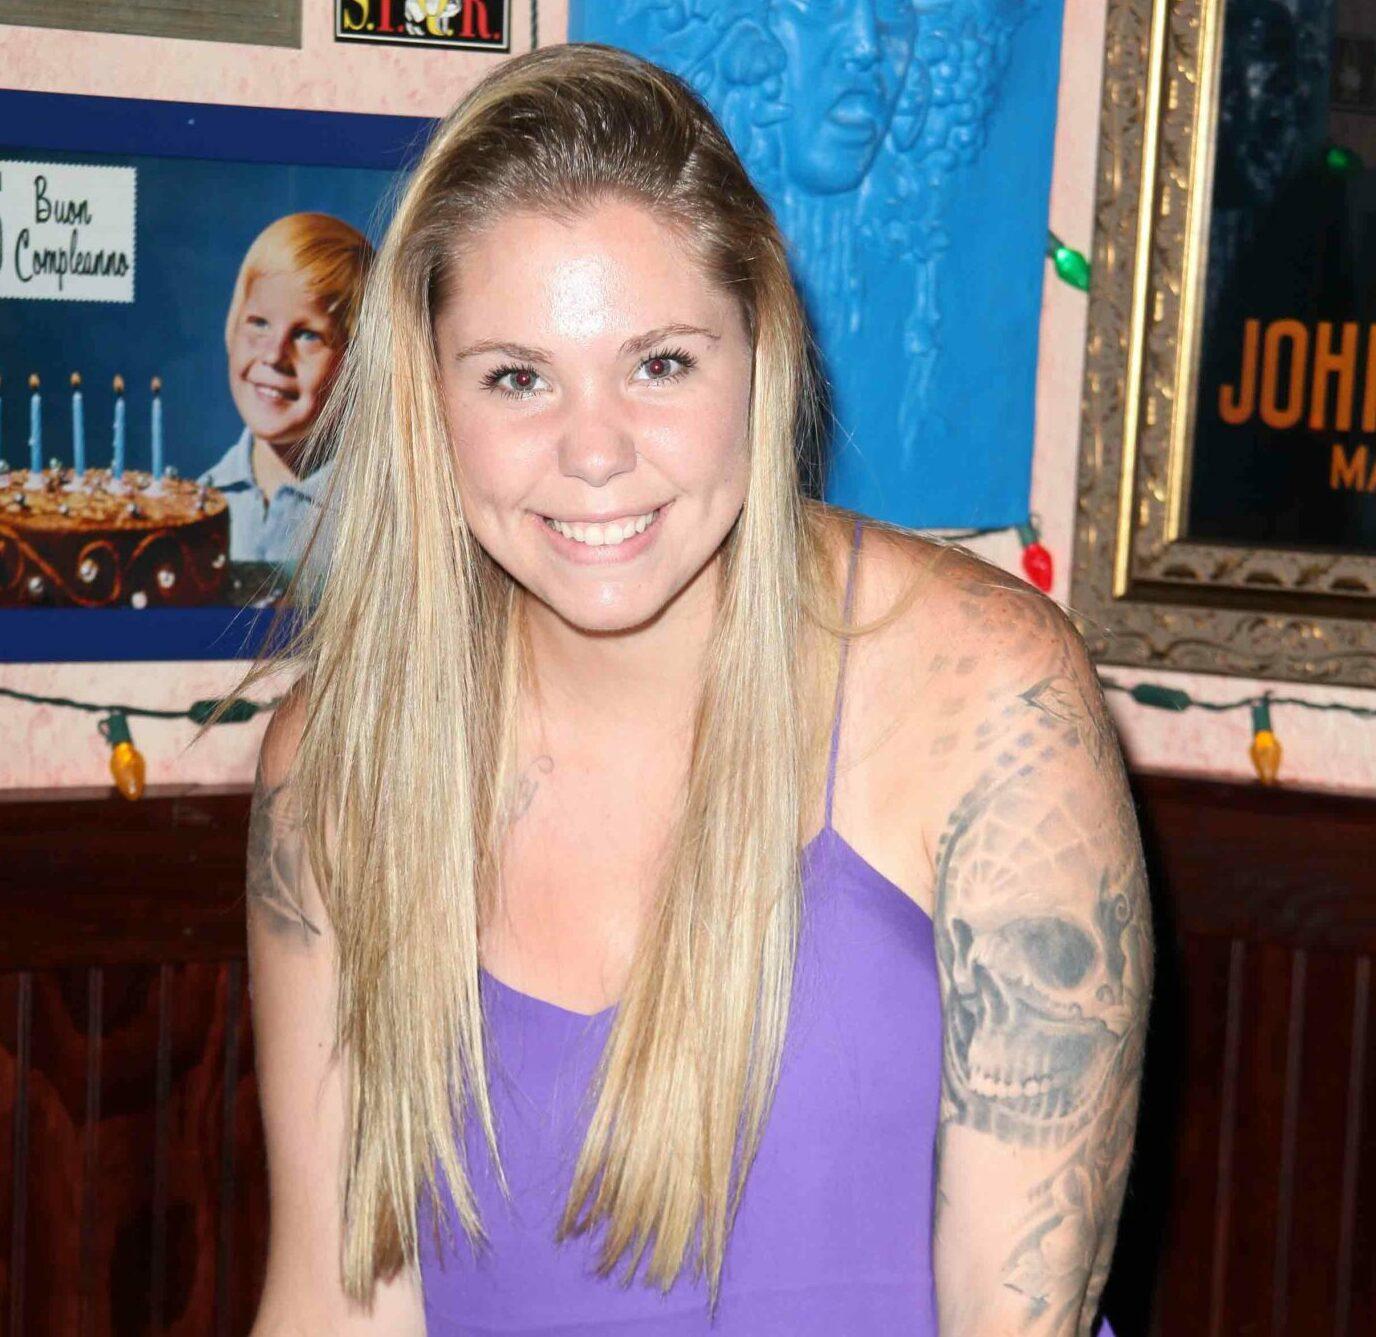 'Teen Mom 2' star Kailyn Lowry has her handprints immortalized in marinara sauce at Buca Di Beppo restaurant in Times Square